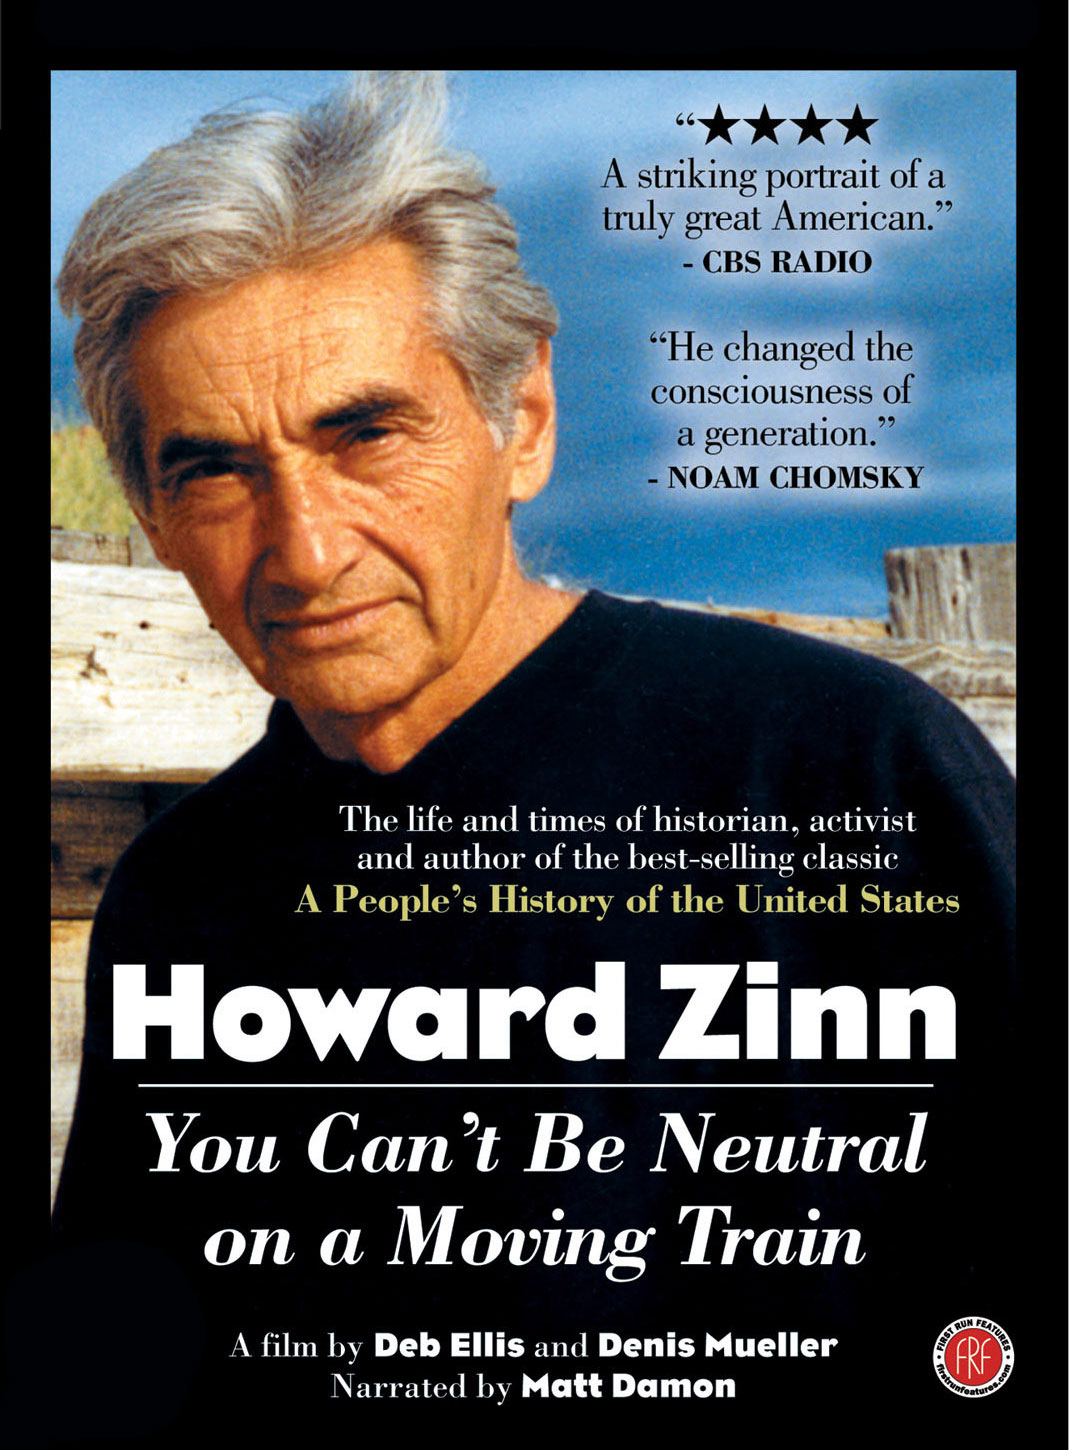 Howard Zinn: You Can’t Be Neutral on a Moving Train